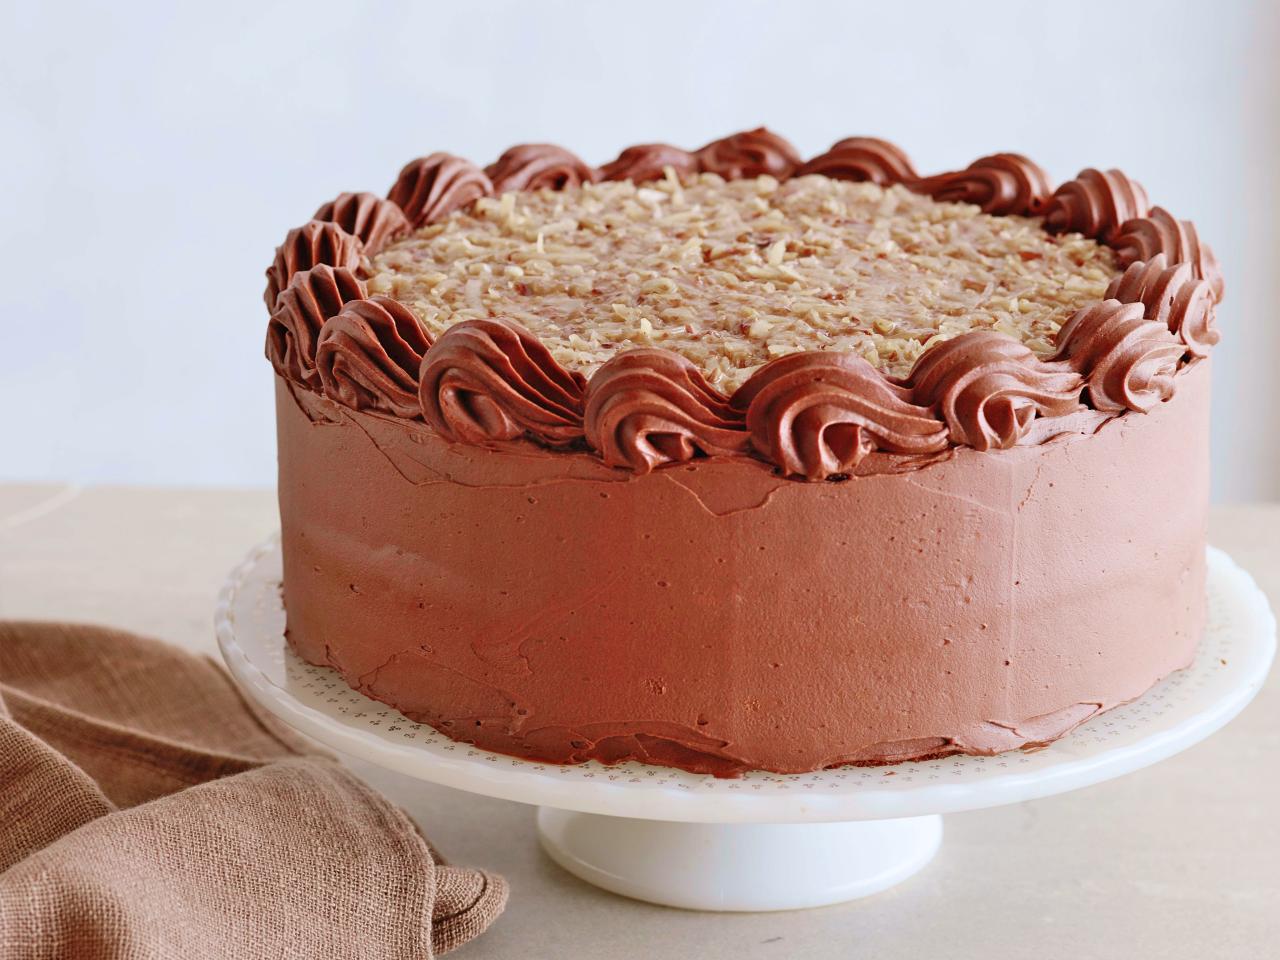 Best Alternative Frosting for German Chocolate Cake | Easy ...